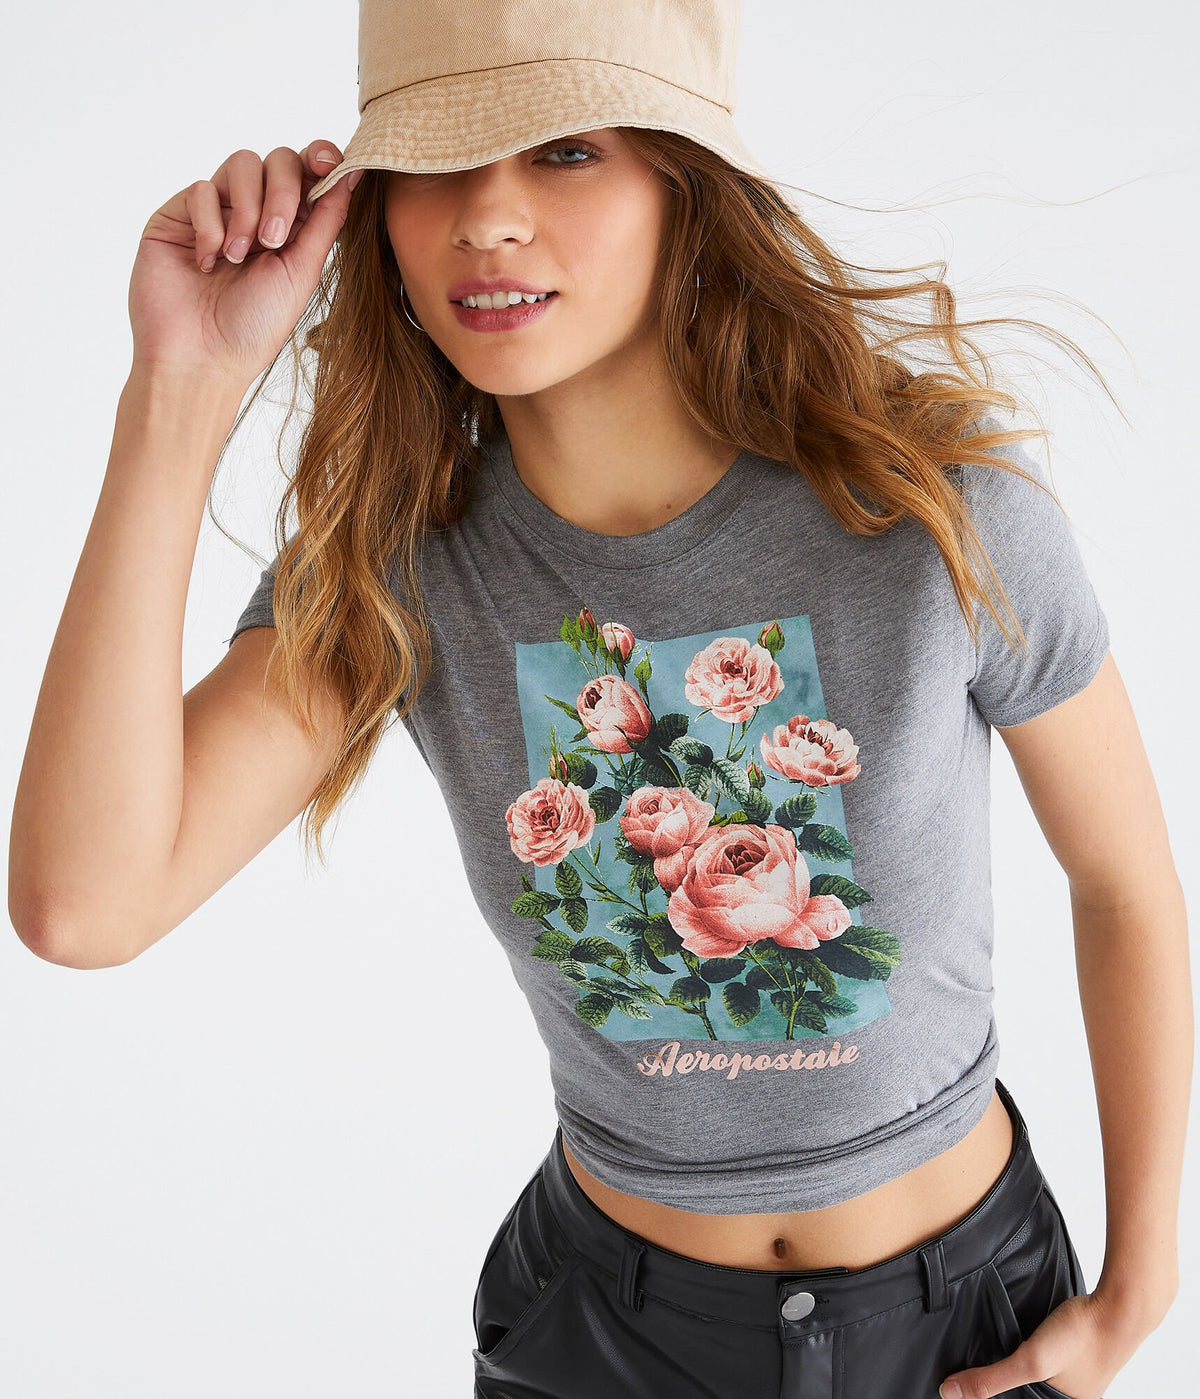 Aeropostale Womens' Aeropostale Roses Foil Graphic Tee - Grey - Size XS - Cotton - Teen Fashion & Clothing Med Hthr Grey